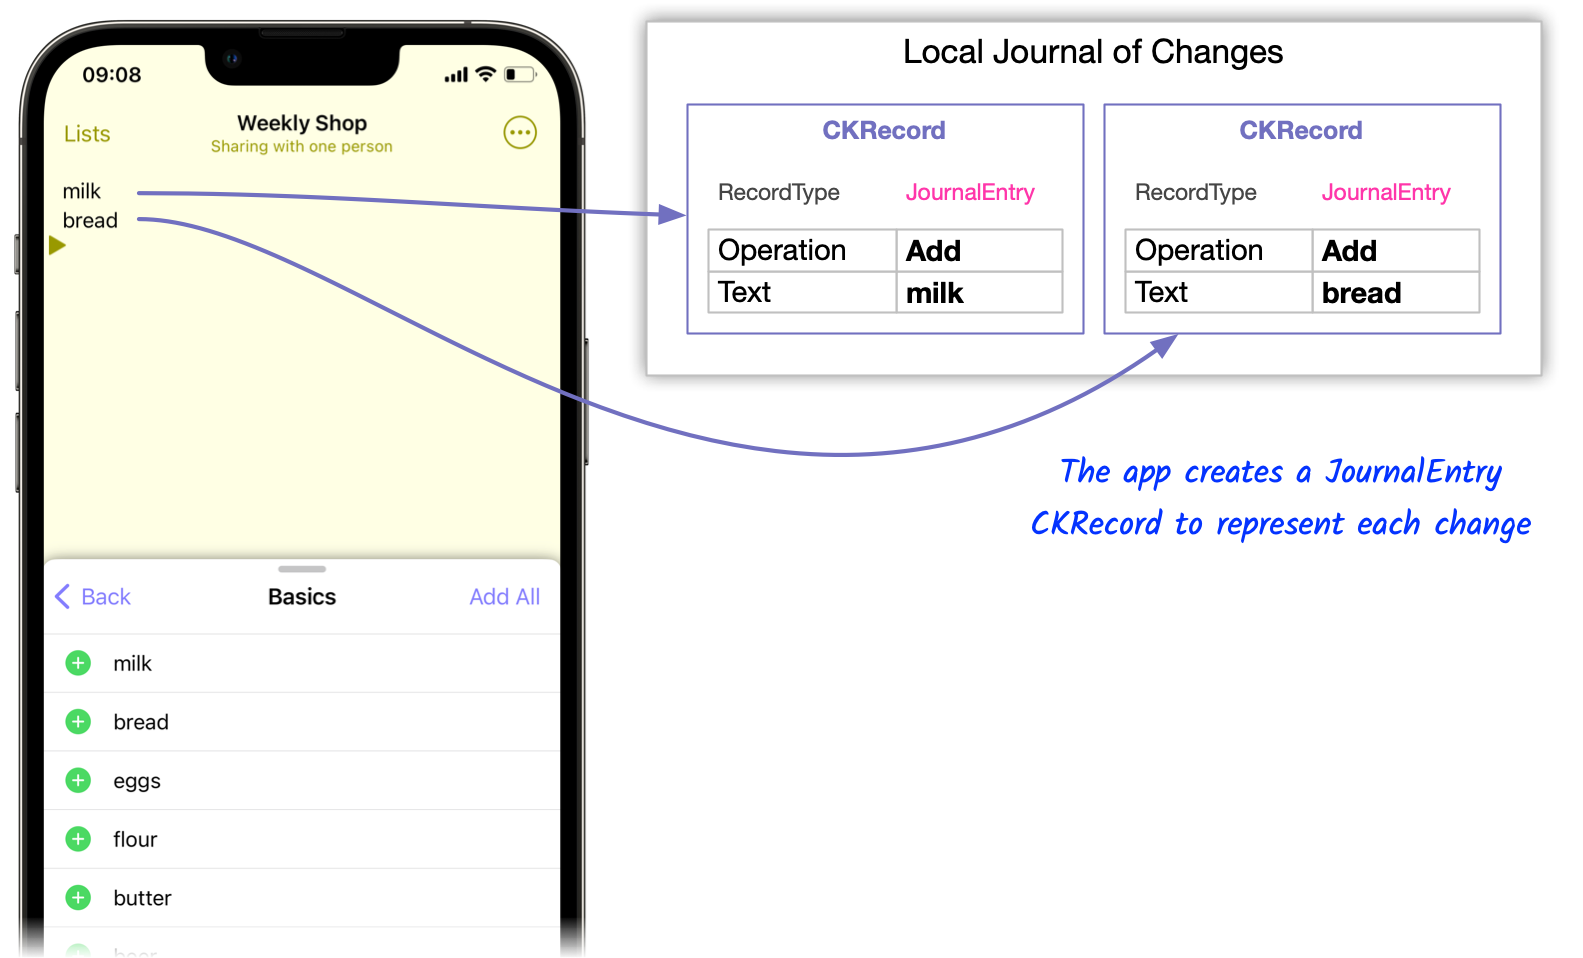 The app creates two JournalEntry records to represent the changes